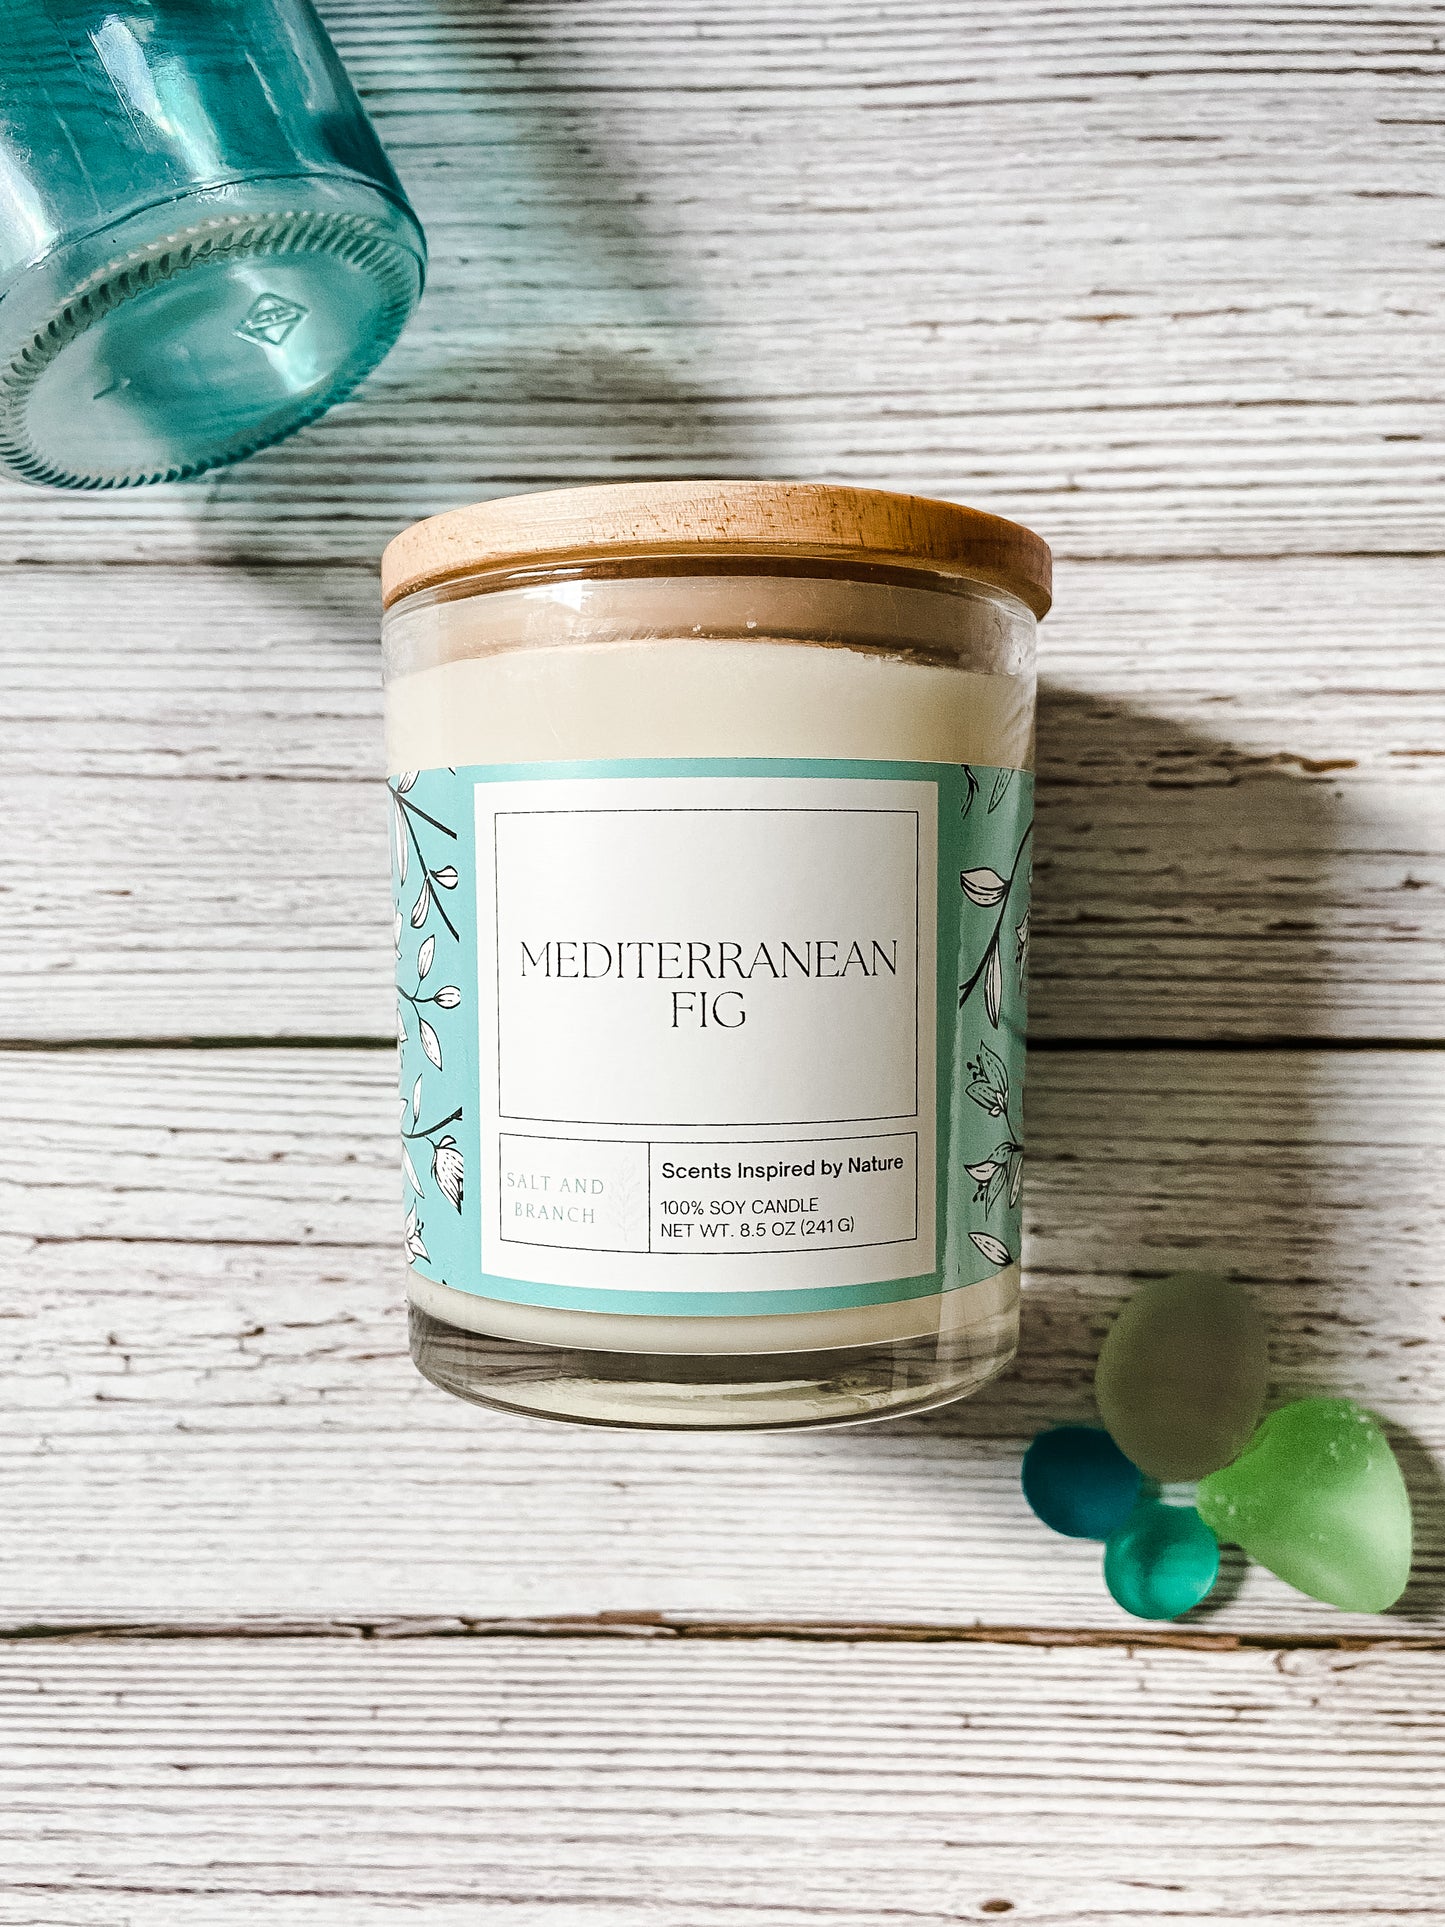 Mediterranean Fig Soy Candle - Salt and Branch